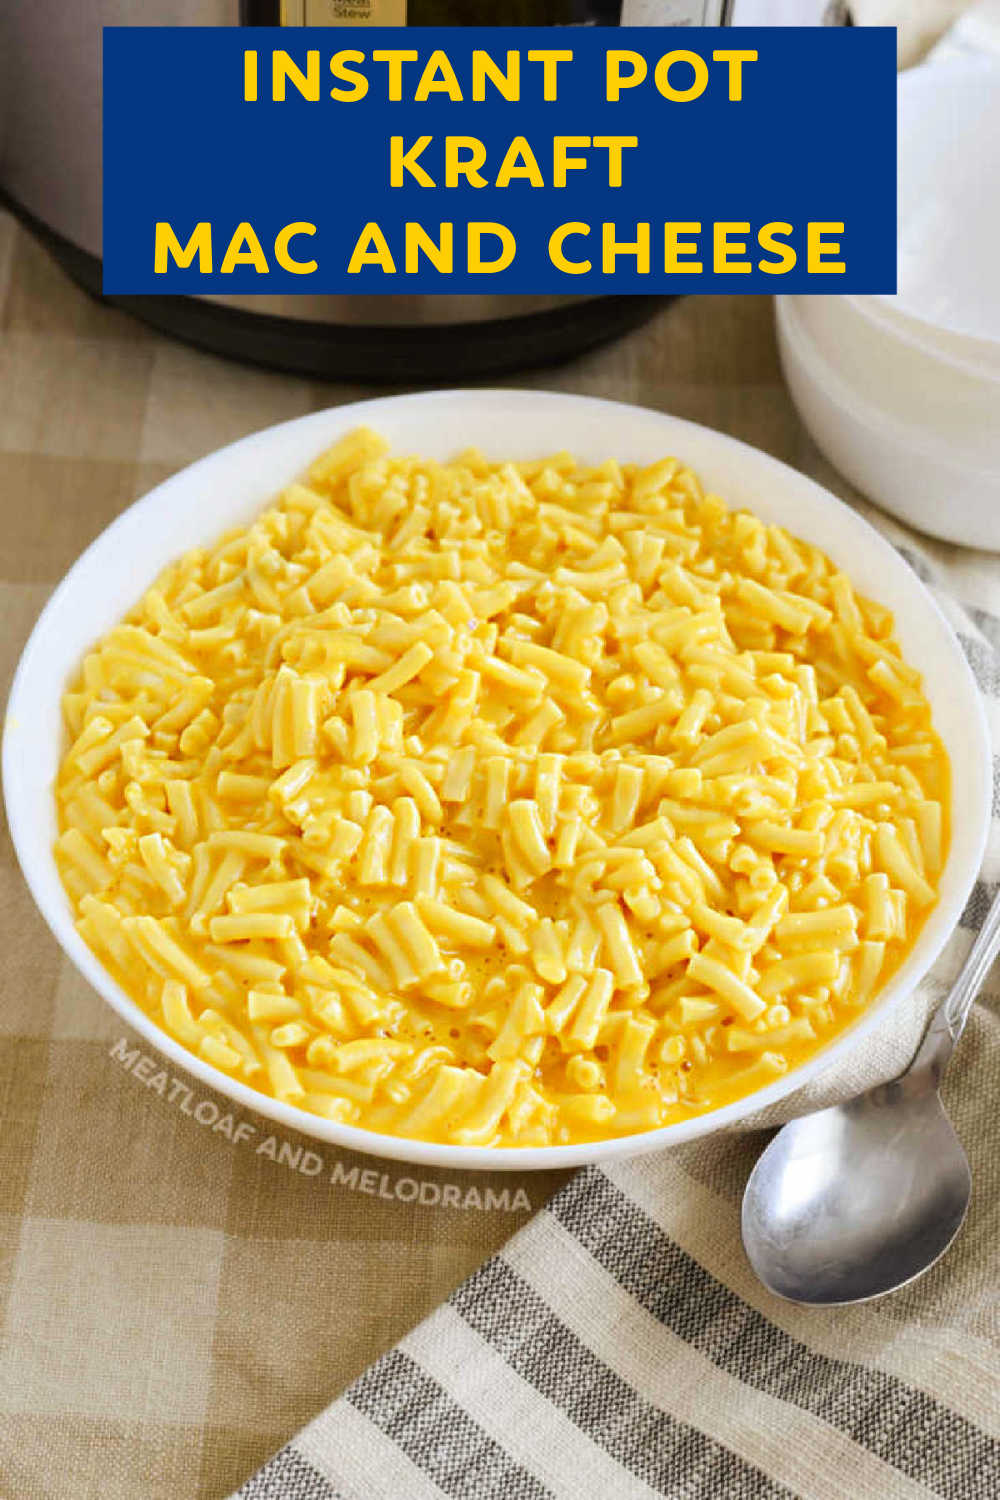 Instant Pot Kraft Mac and Cheese Recipe is an easy way to make Kraft macaroni and cheese or any boxed mac and cheese in your pressure cooker. This easy recipe takes just a few minutes and is quicker than the stove top method.  via @meamel